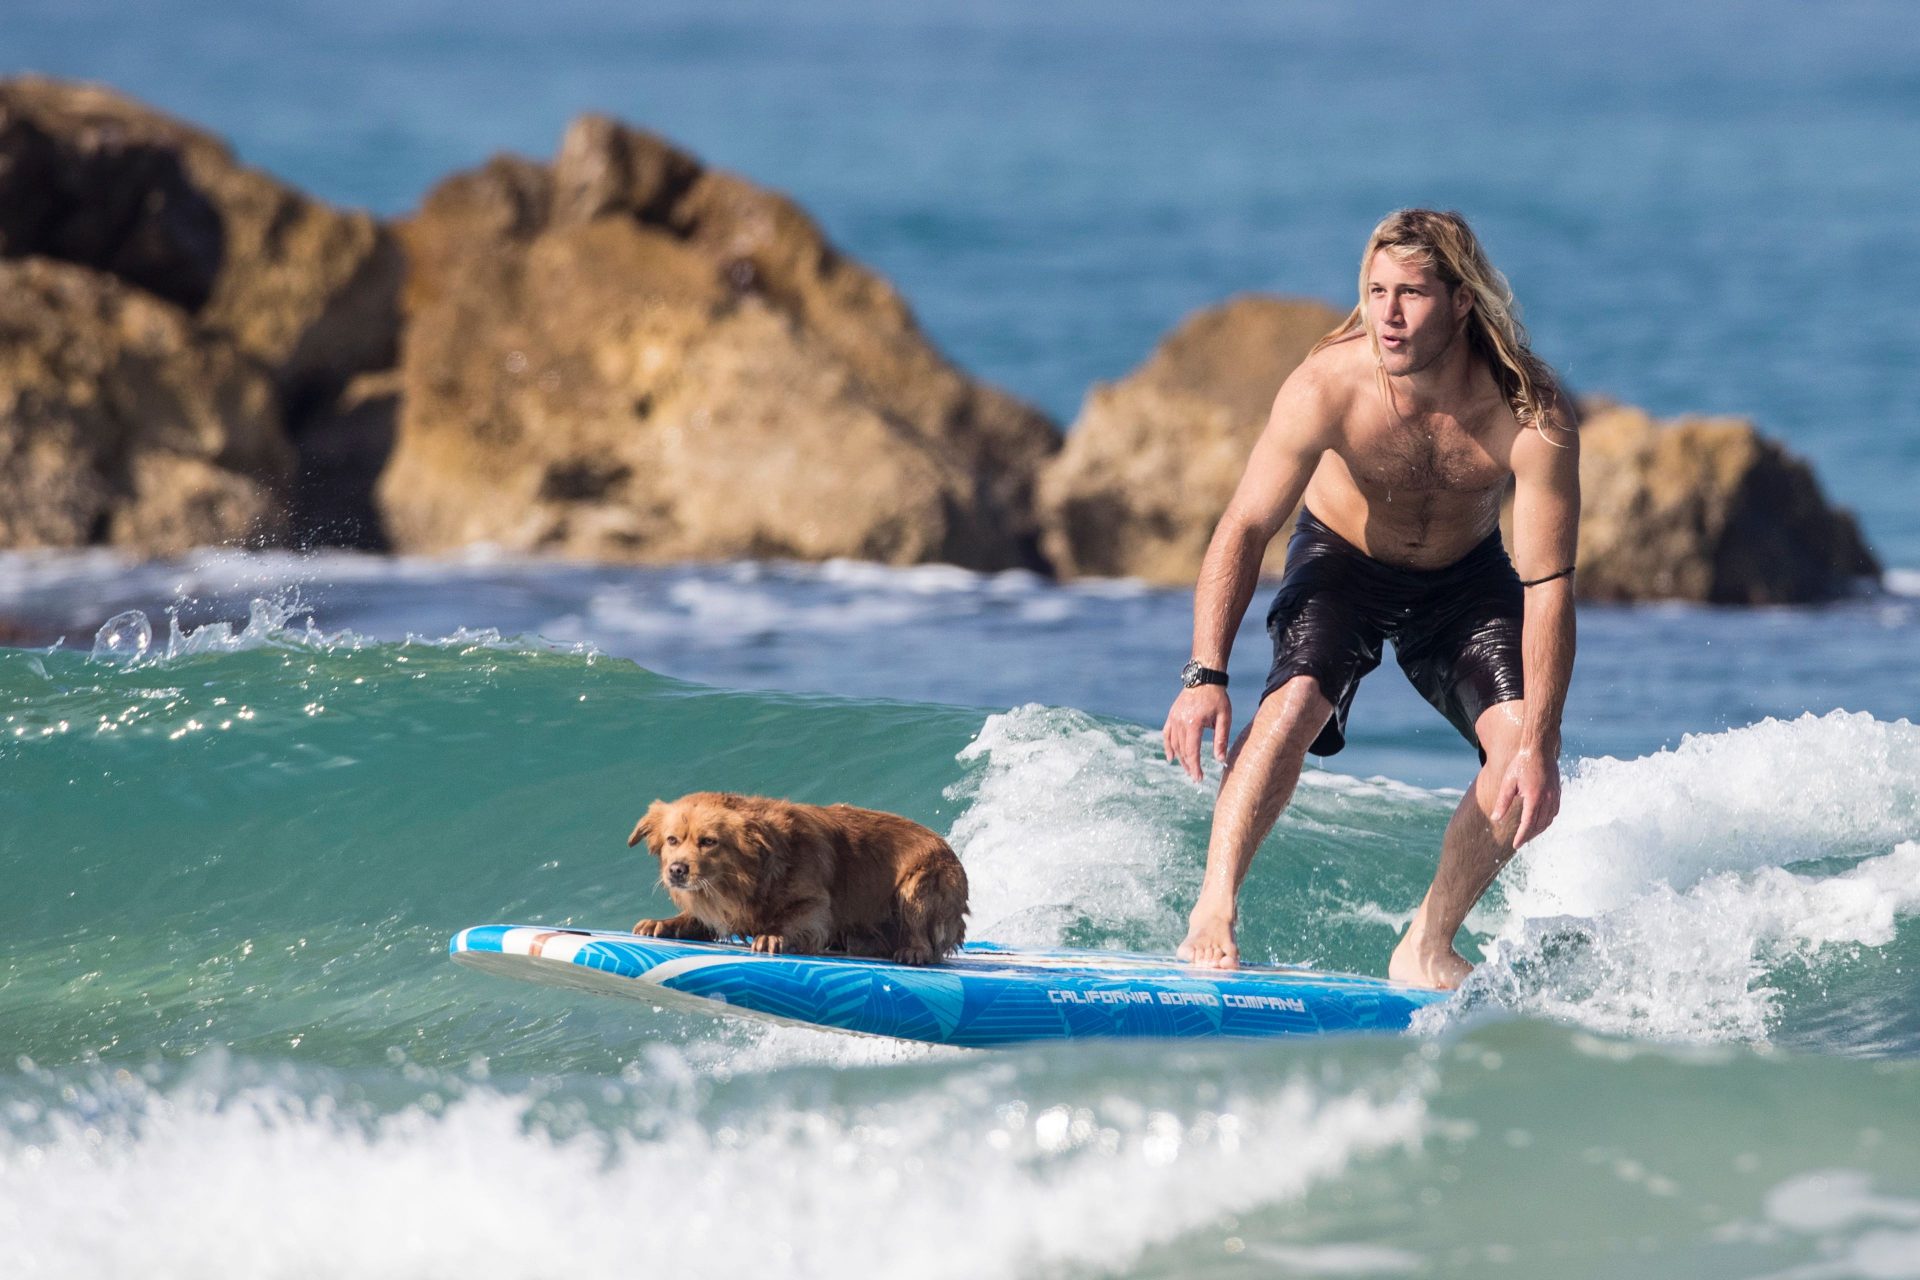 What breeds surf?